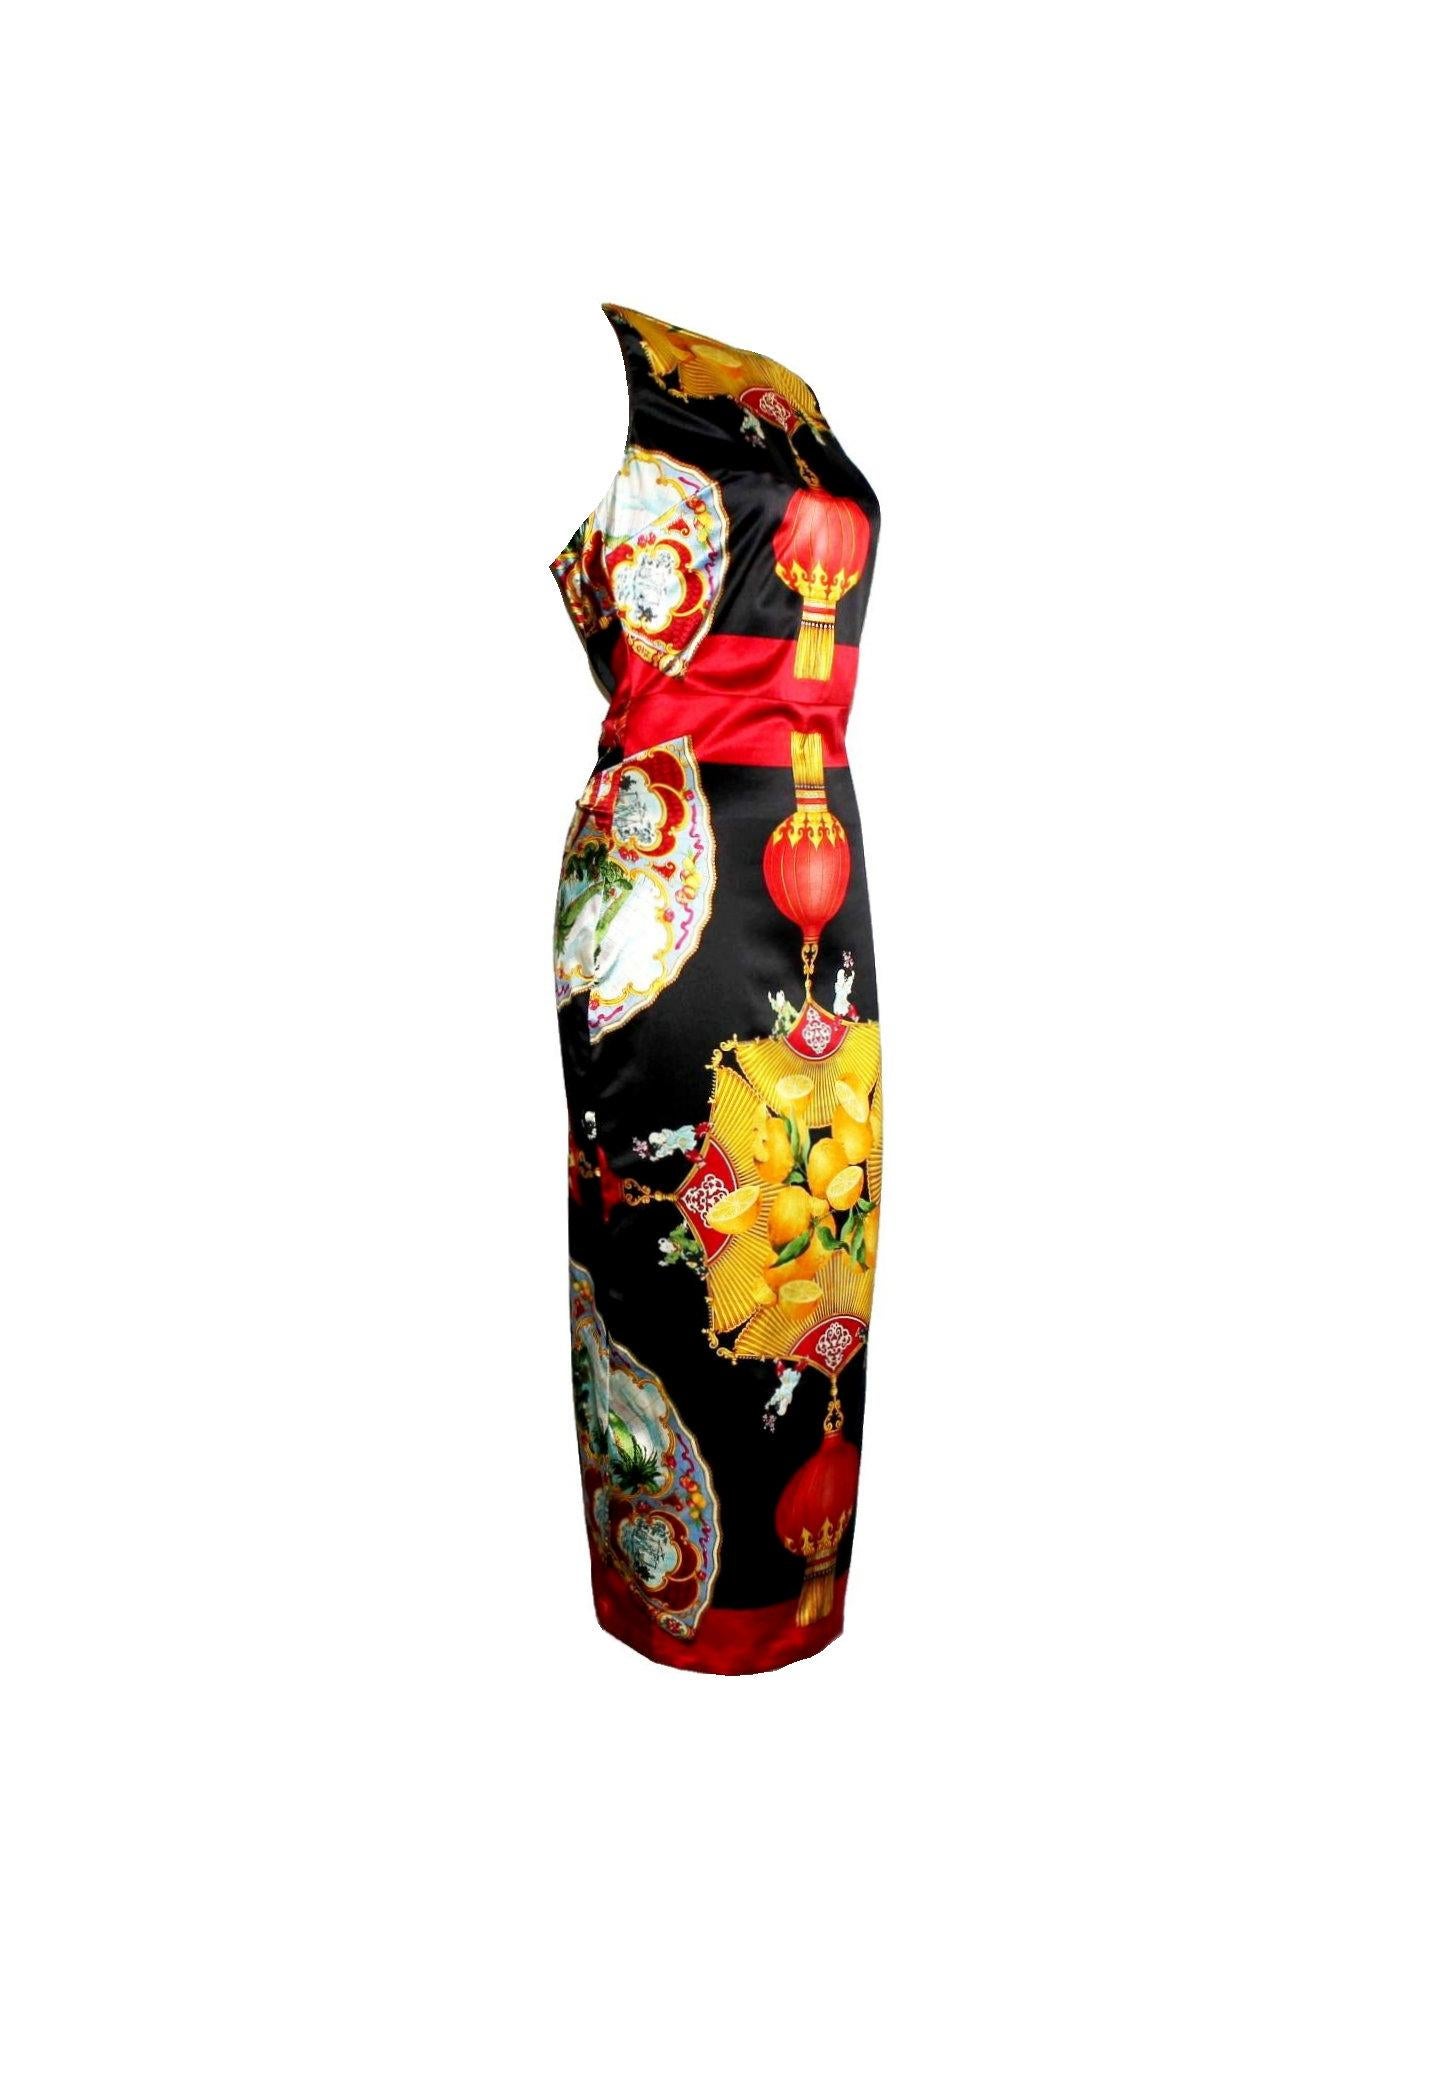 BREATHTAKING

DOLCE & GABBANA

CHINESE PRINT CORSET DRESS GOWN

COLLECTOR'S PIECE

DETAILS:

    A DOLCE & GABBANA classic signature piece that will last you for years
    From the famous 1998 collection
    Dress made out of finest black silk
   